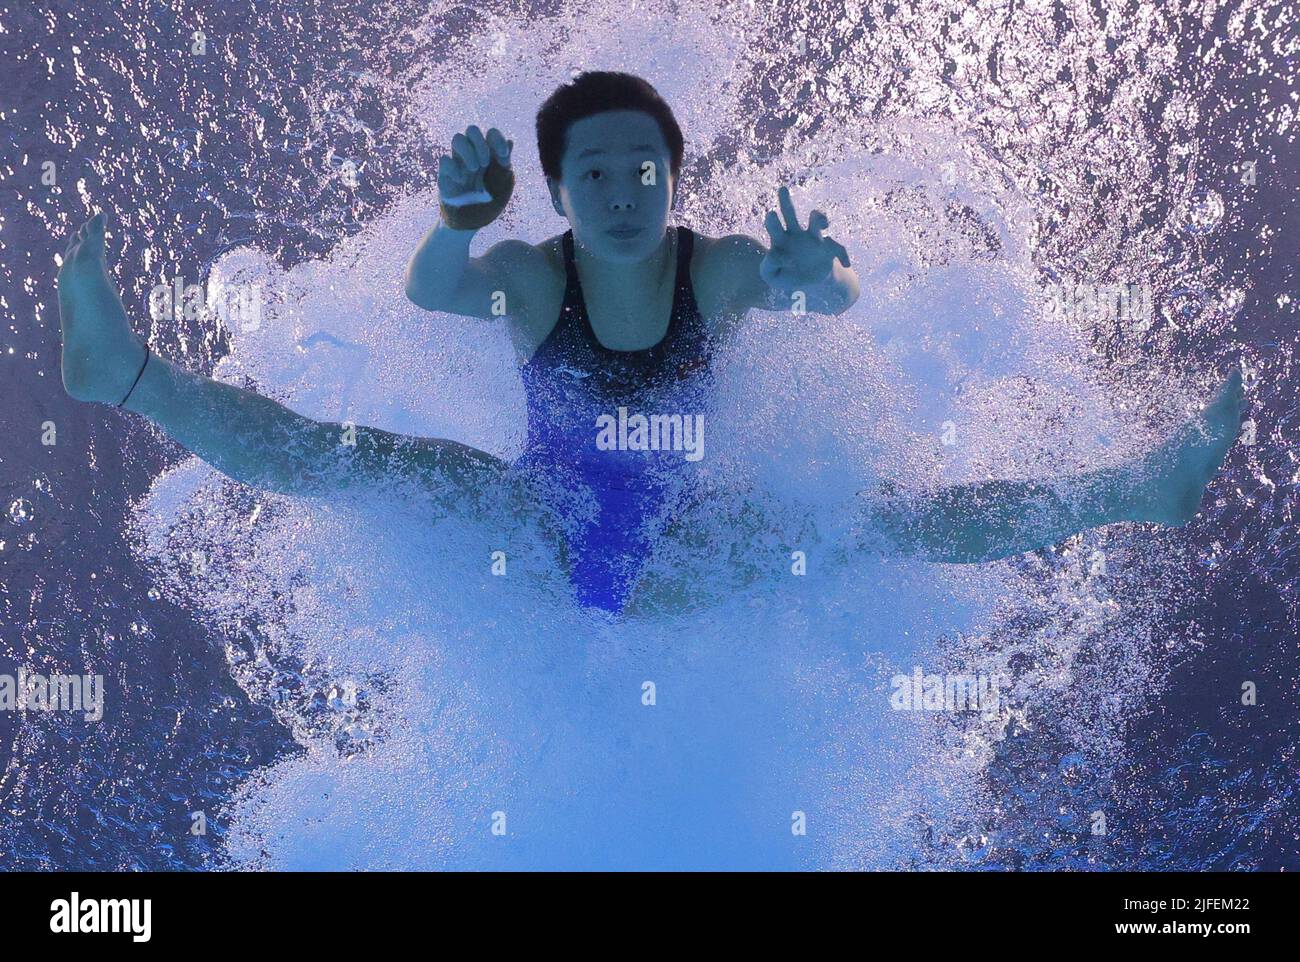 Diving - FINA World Championships - Duna Arena, Budapest, Hungary - July 2, 2022 China's Yiwen Chen in action during the women's 3m springboard final REUTERS/Antonio Bronic Stock Photo